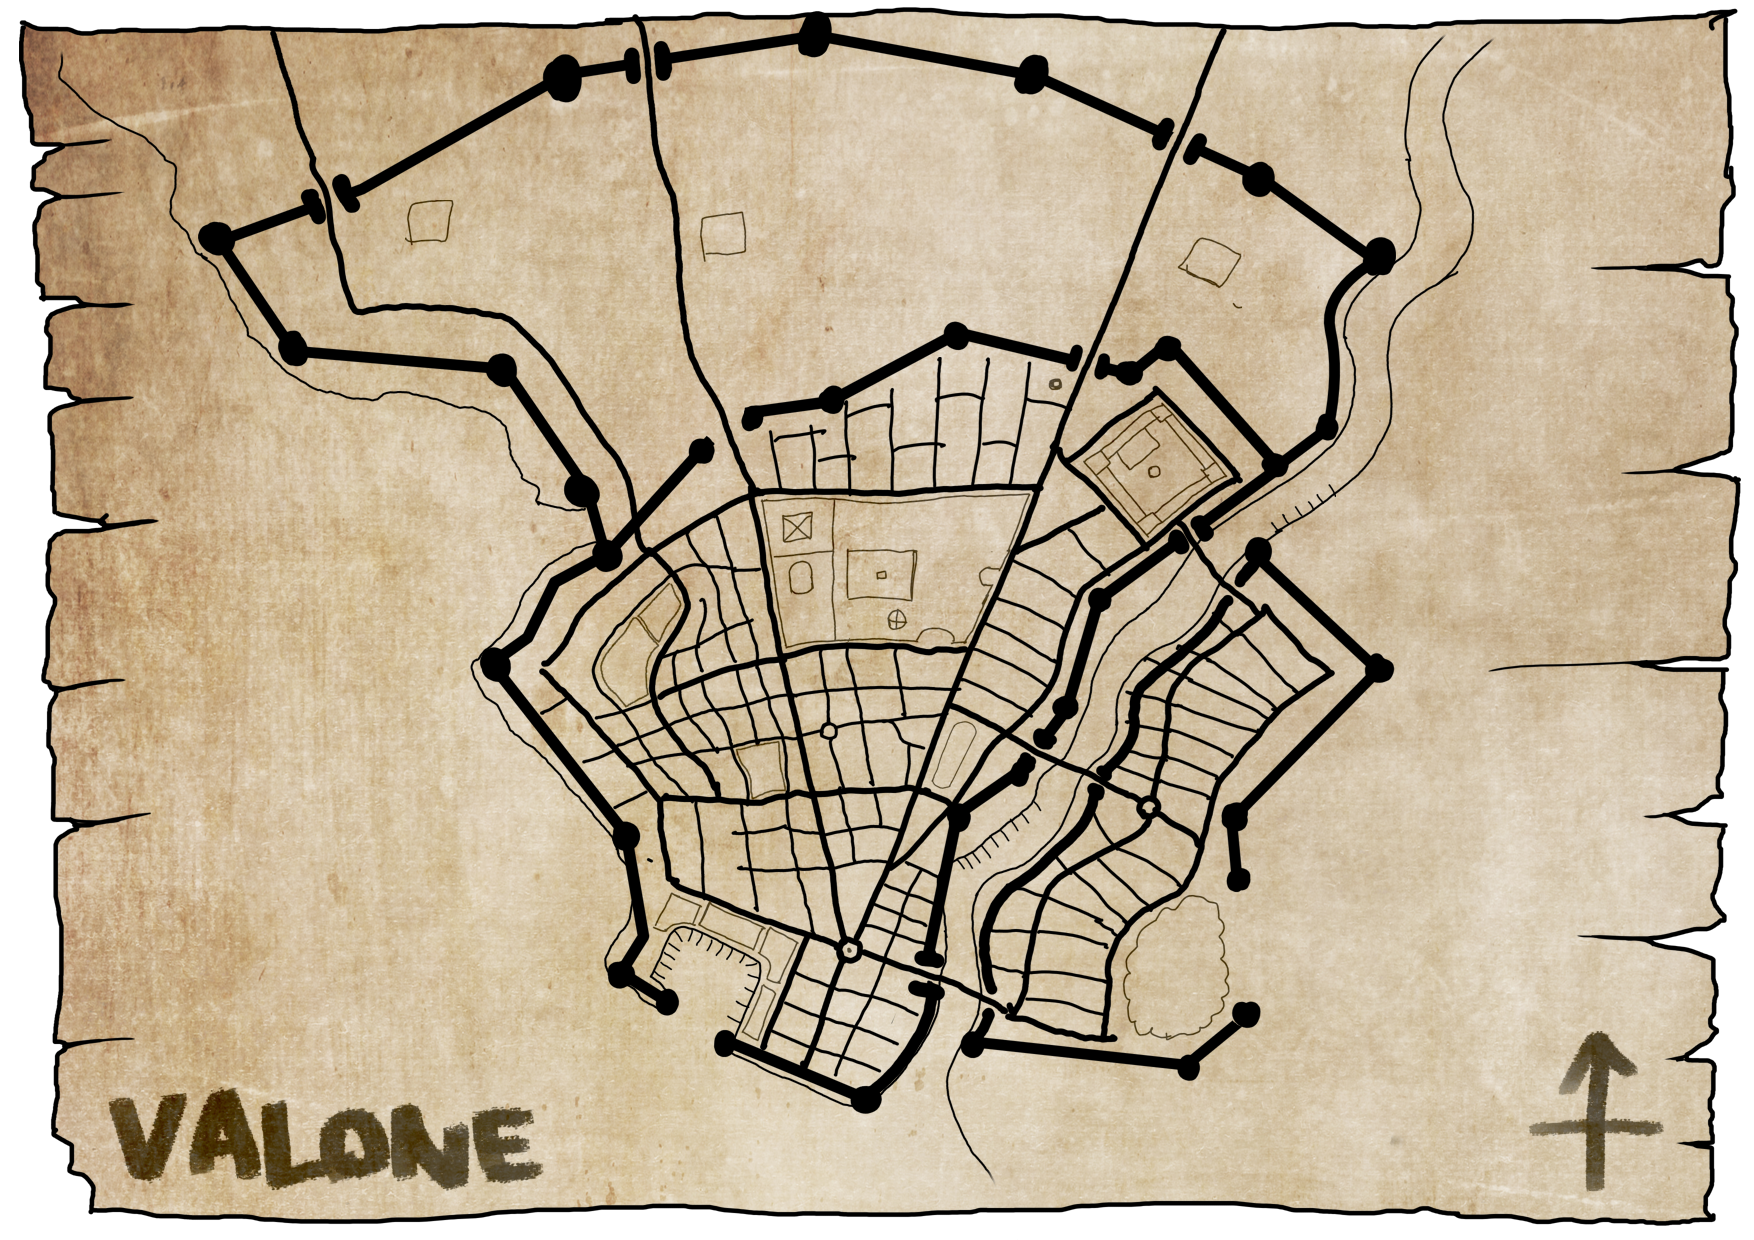 The Map of Valone